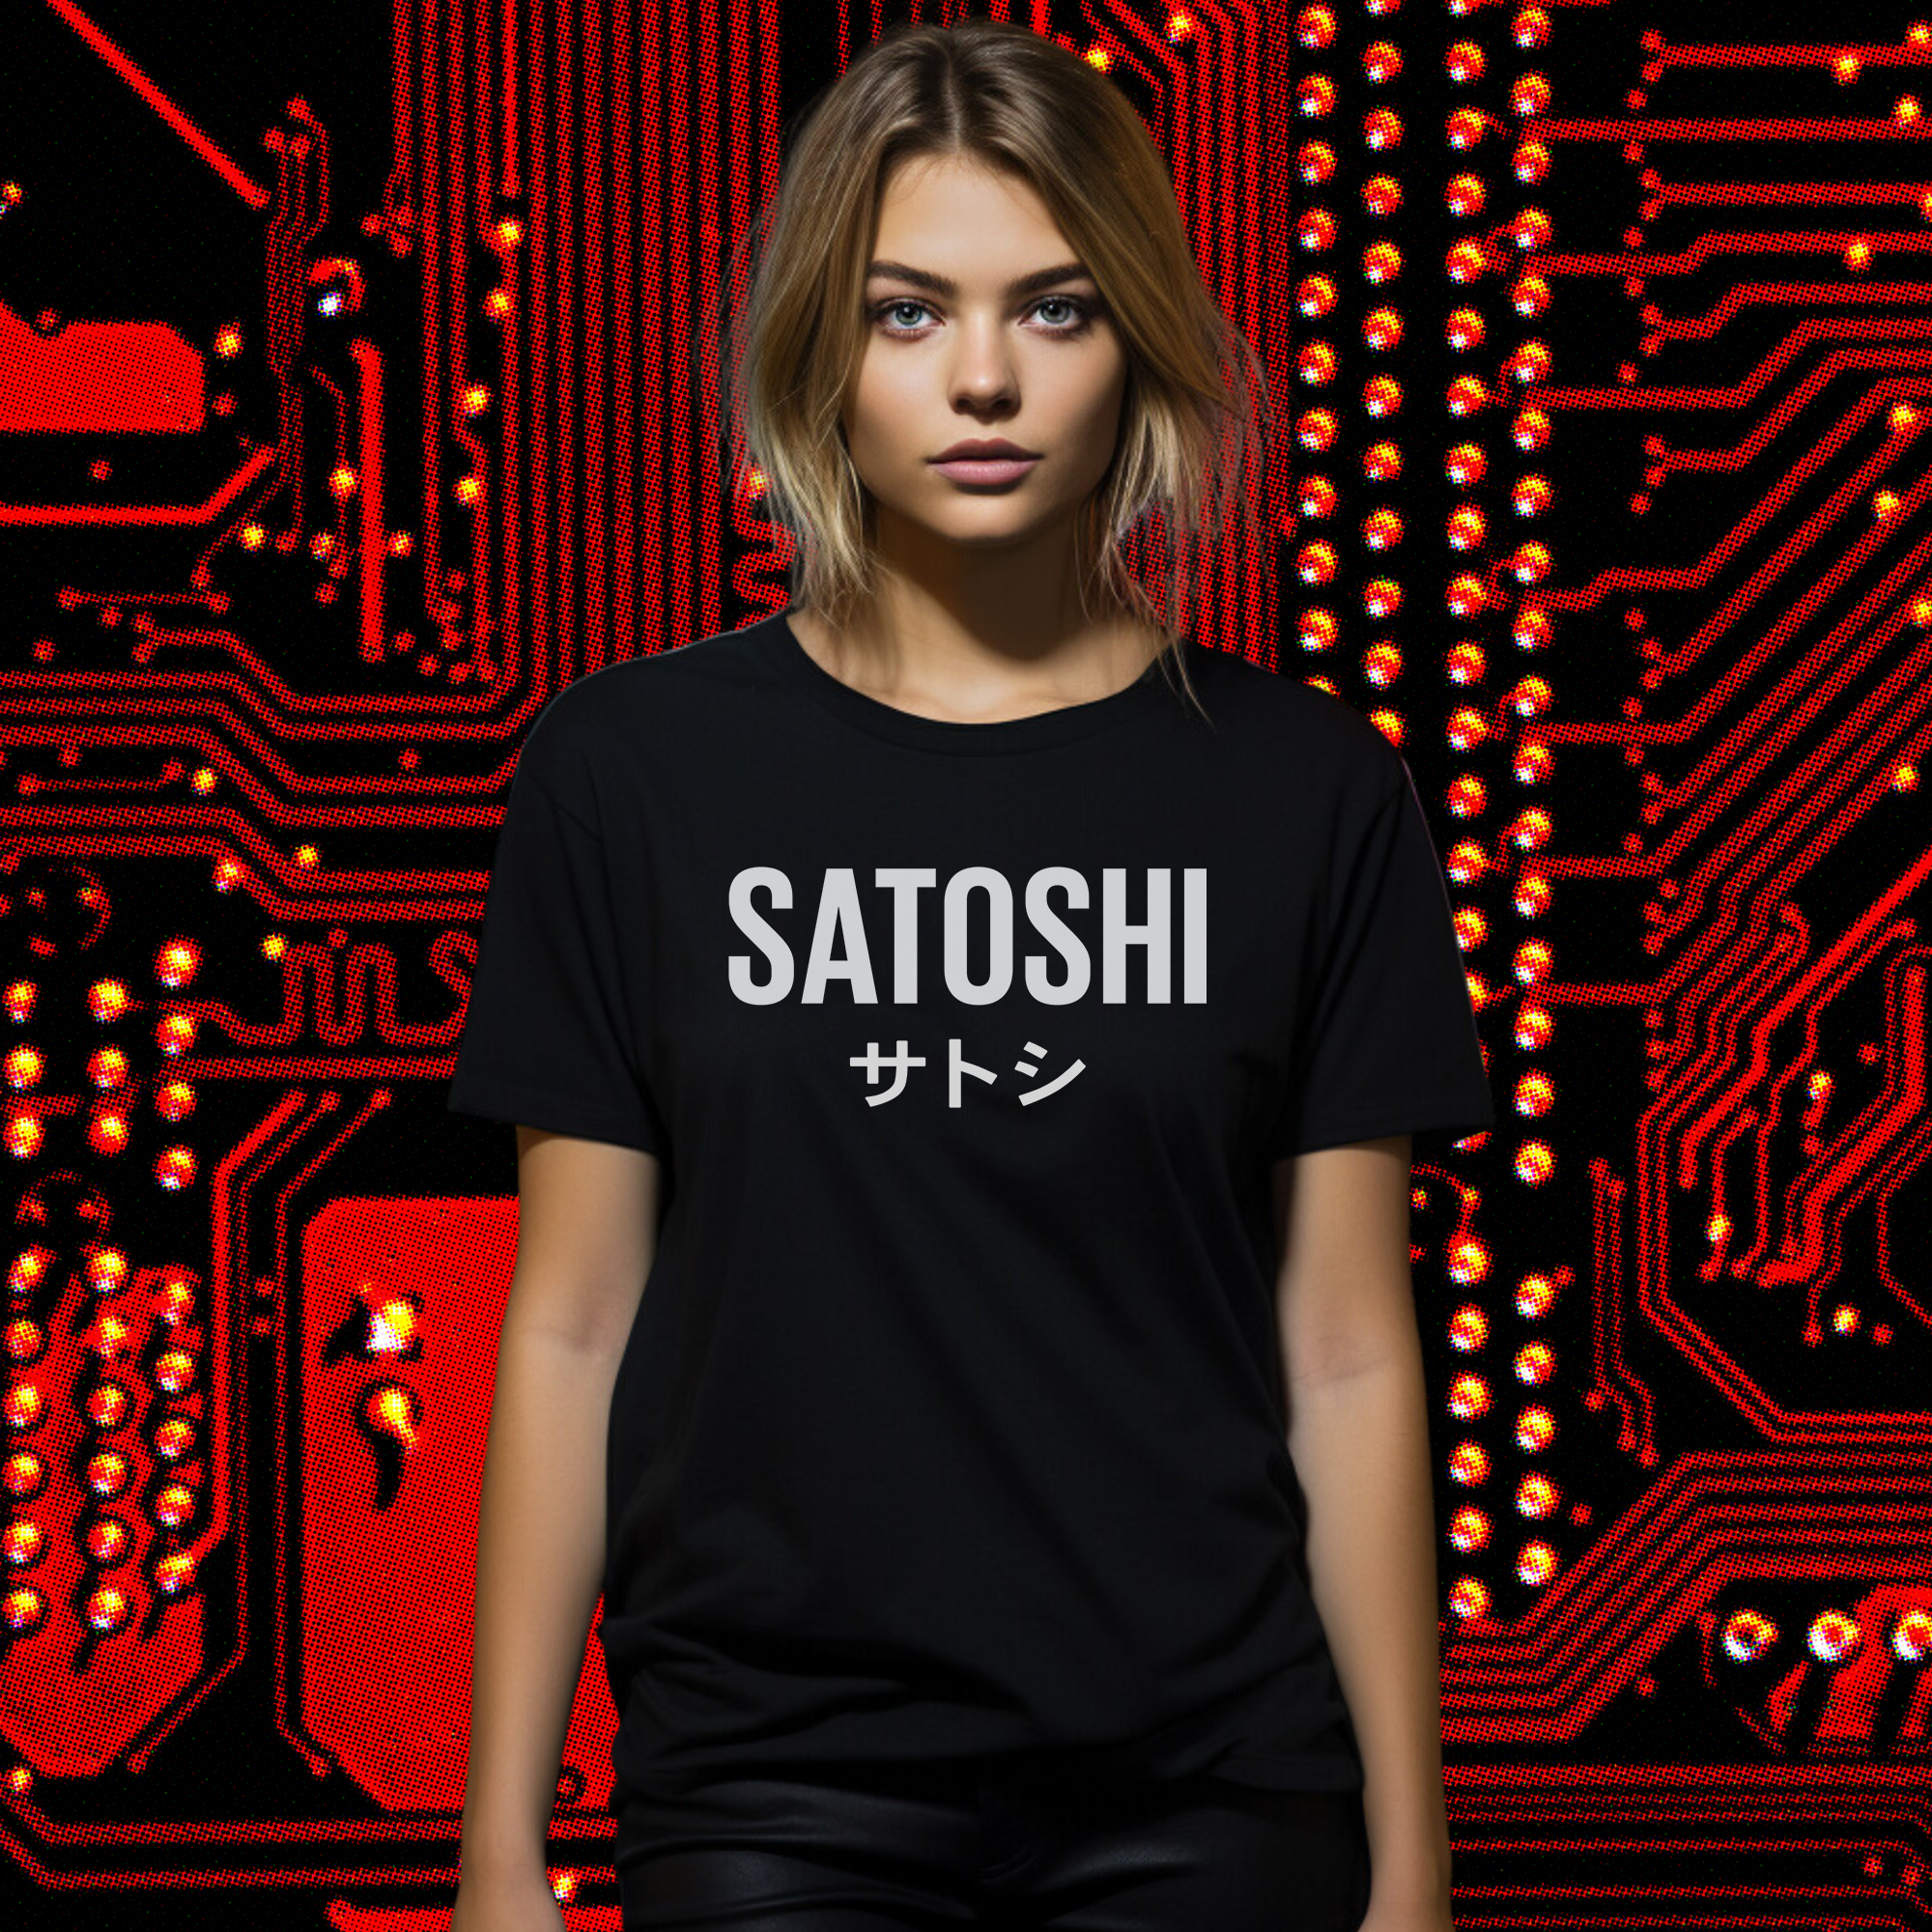 Bitcoin Clothing - Satoshi Tee worn by female model (front view). 